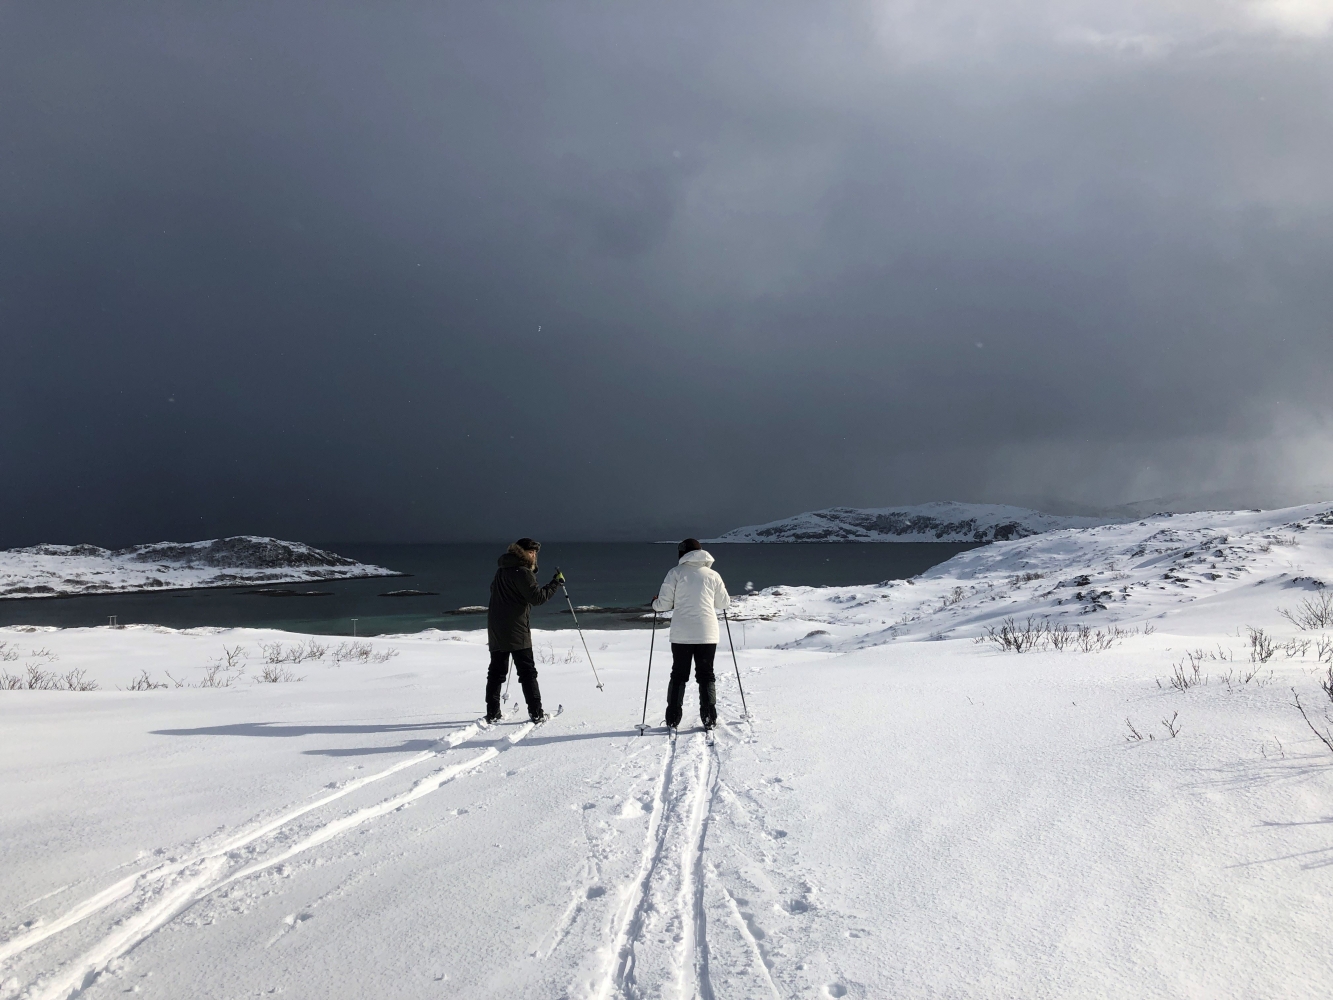 Two people skiing in winter landscape